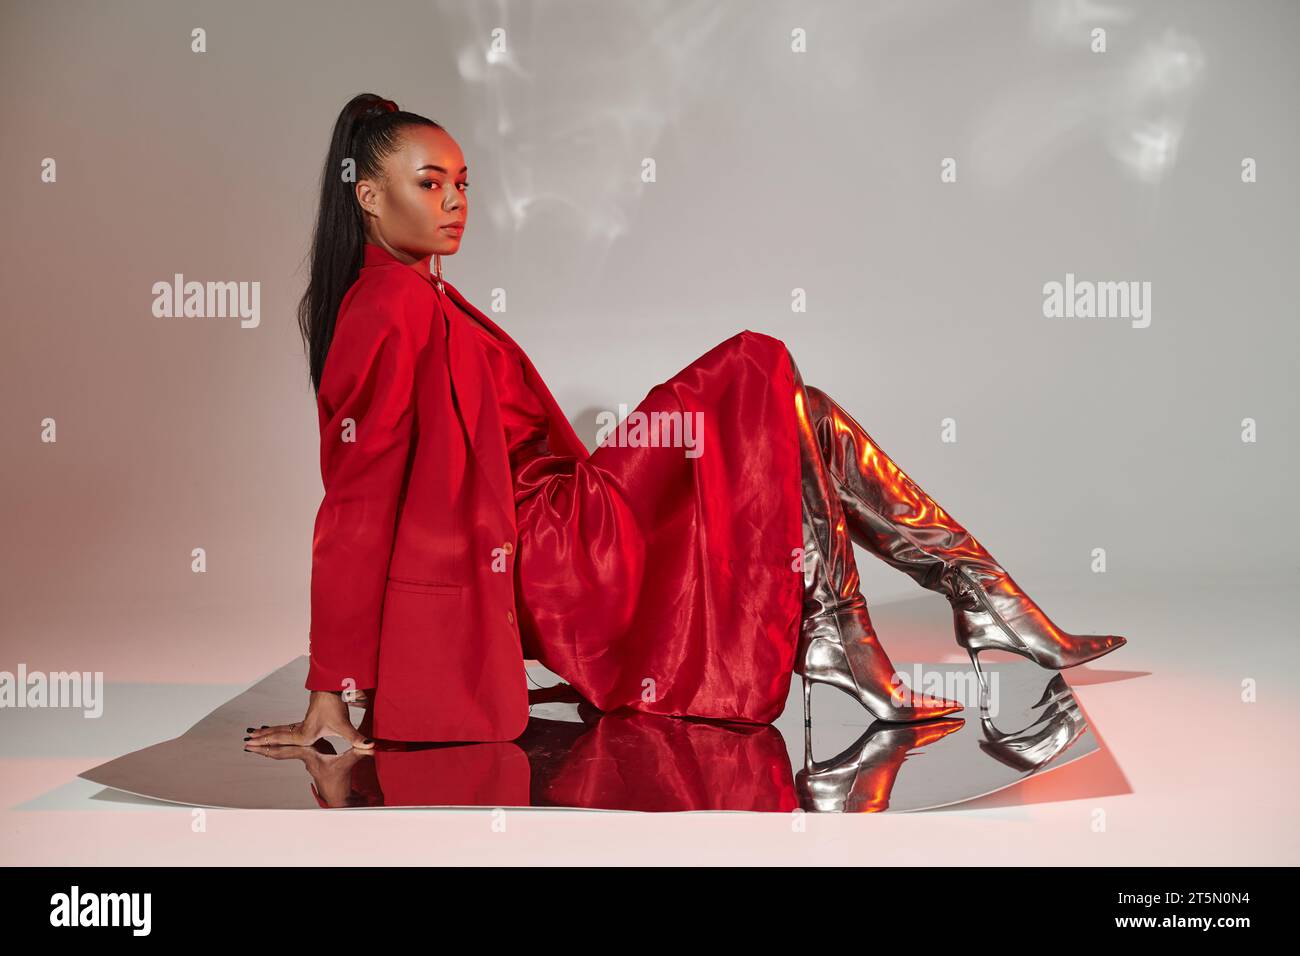 young african american woman in red dress, blazer and silver boots sitting on mirrored surface Stock Photo